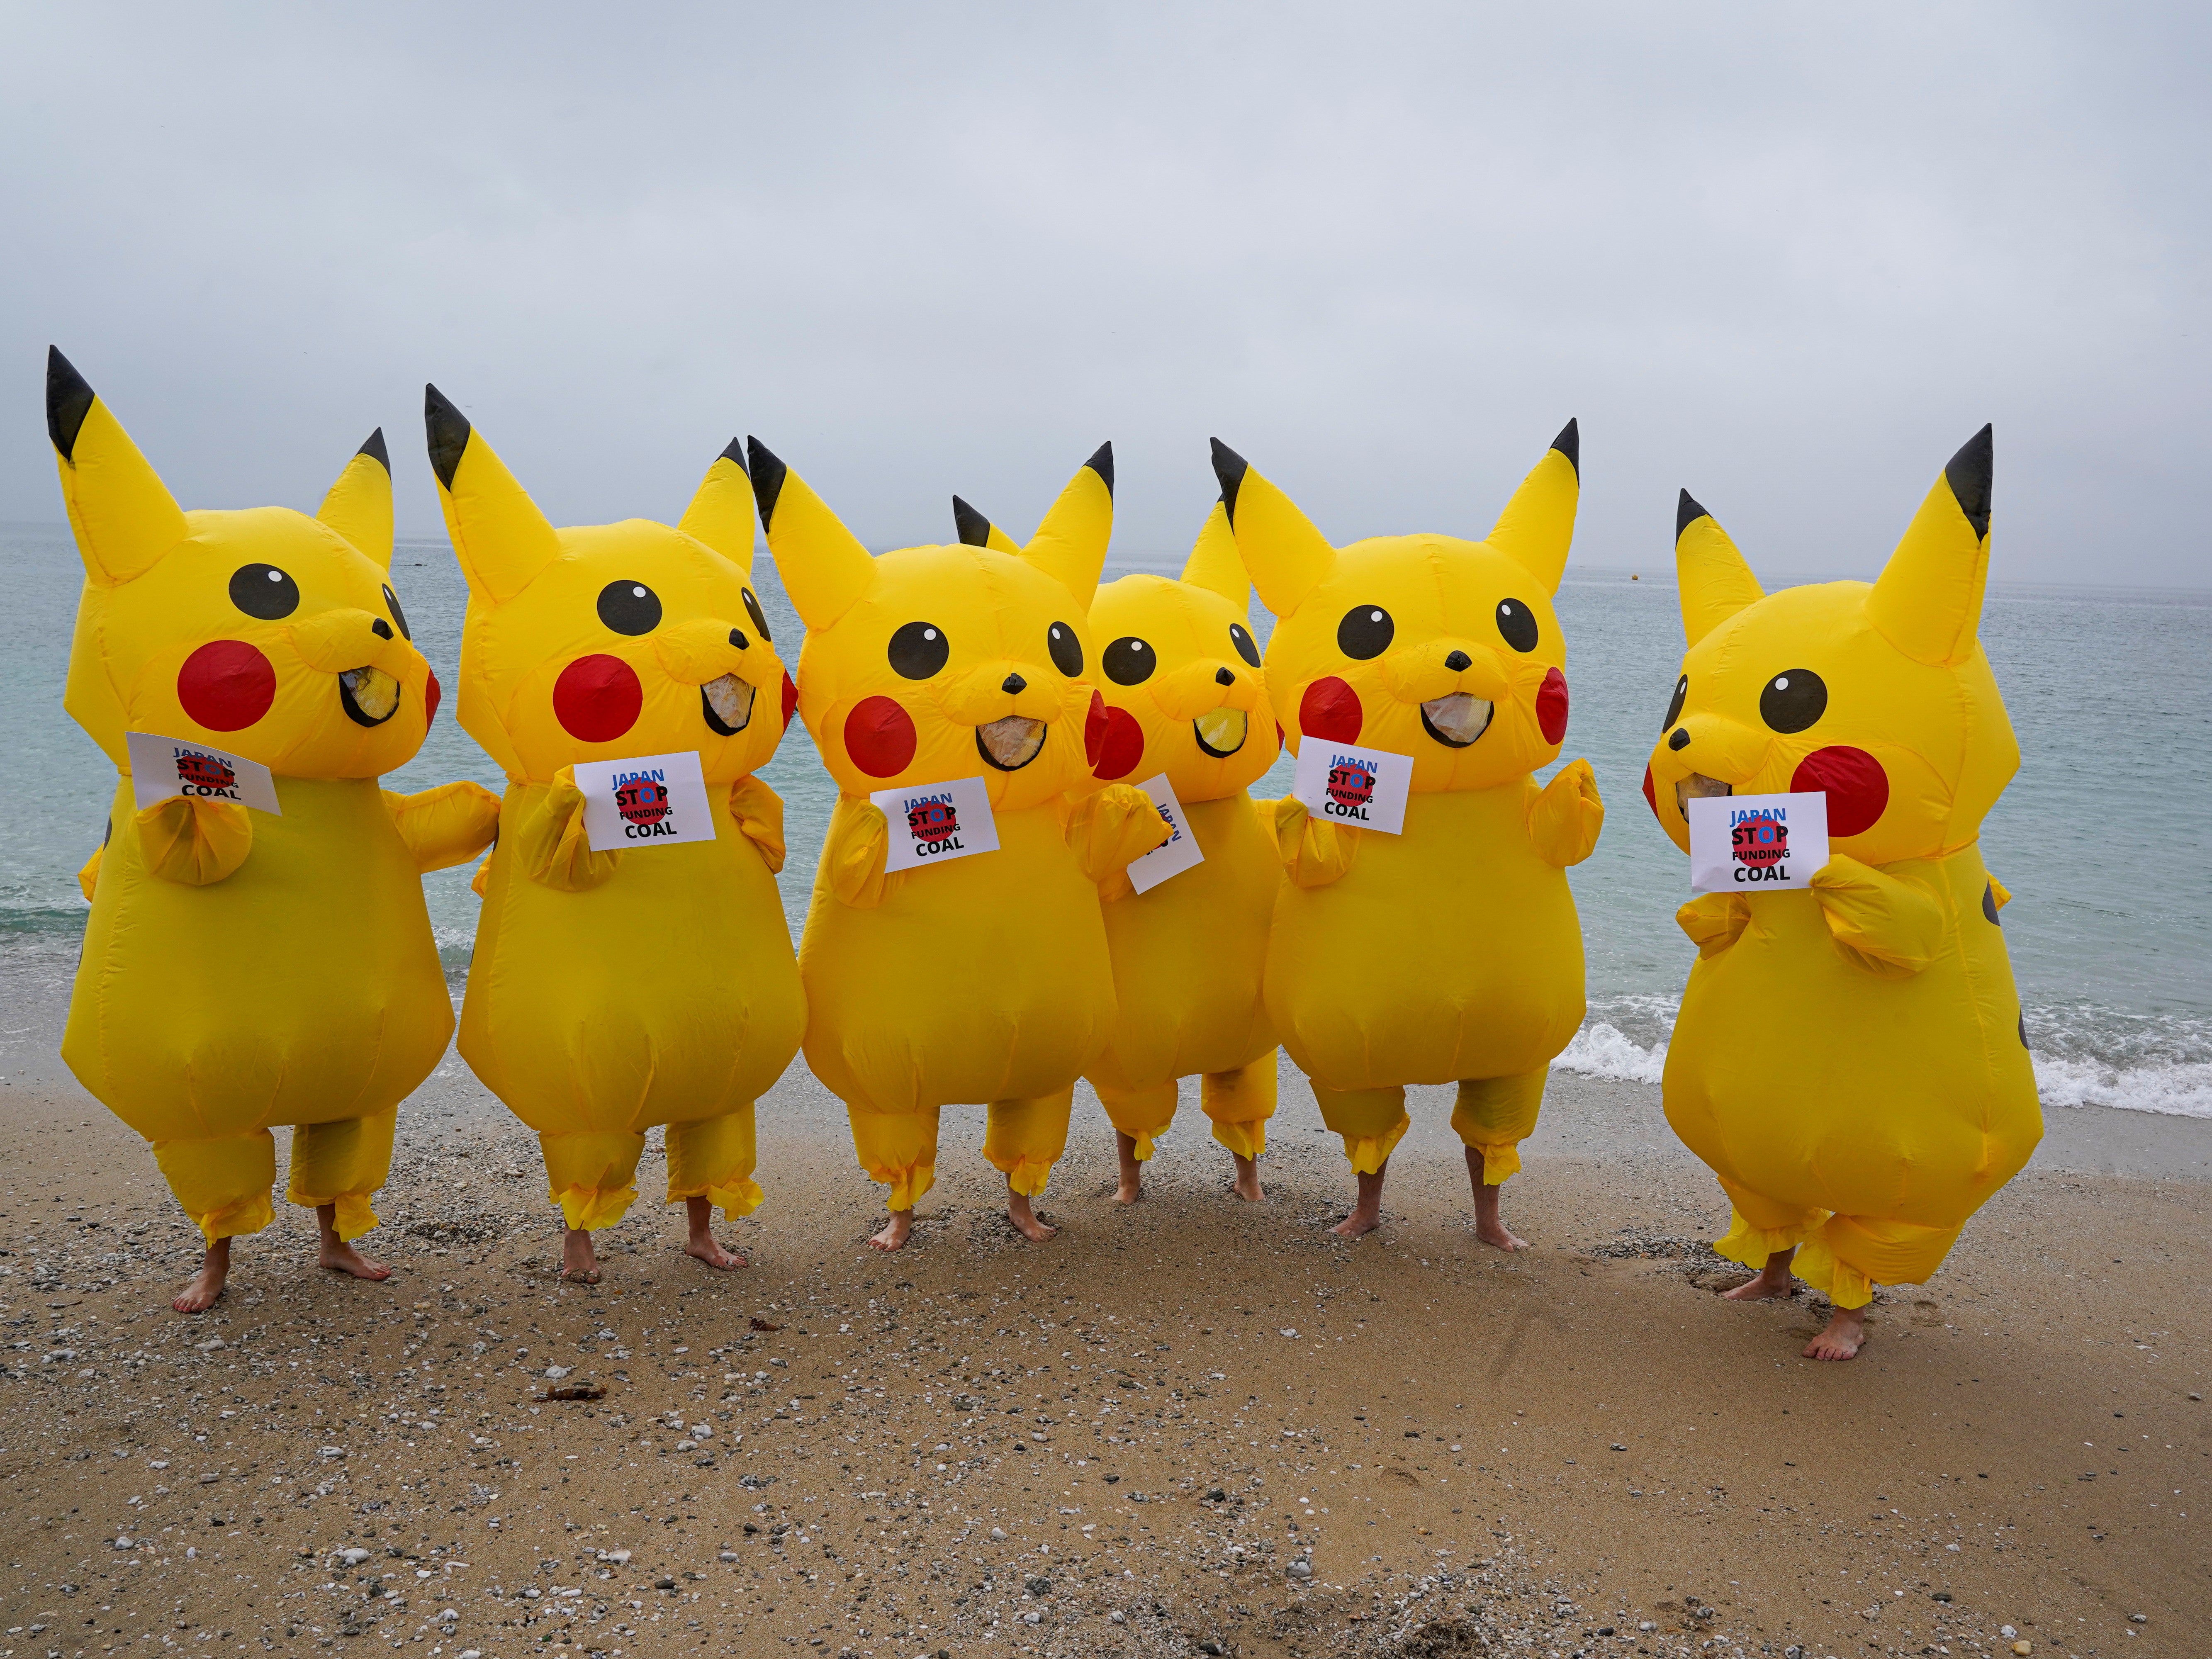 Protesters dressed as Pikachu characters demonstrate on Gyllyngvase Beach, Falmouth